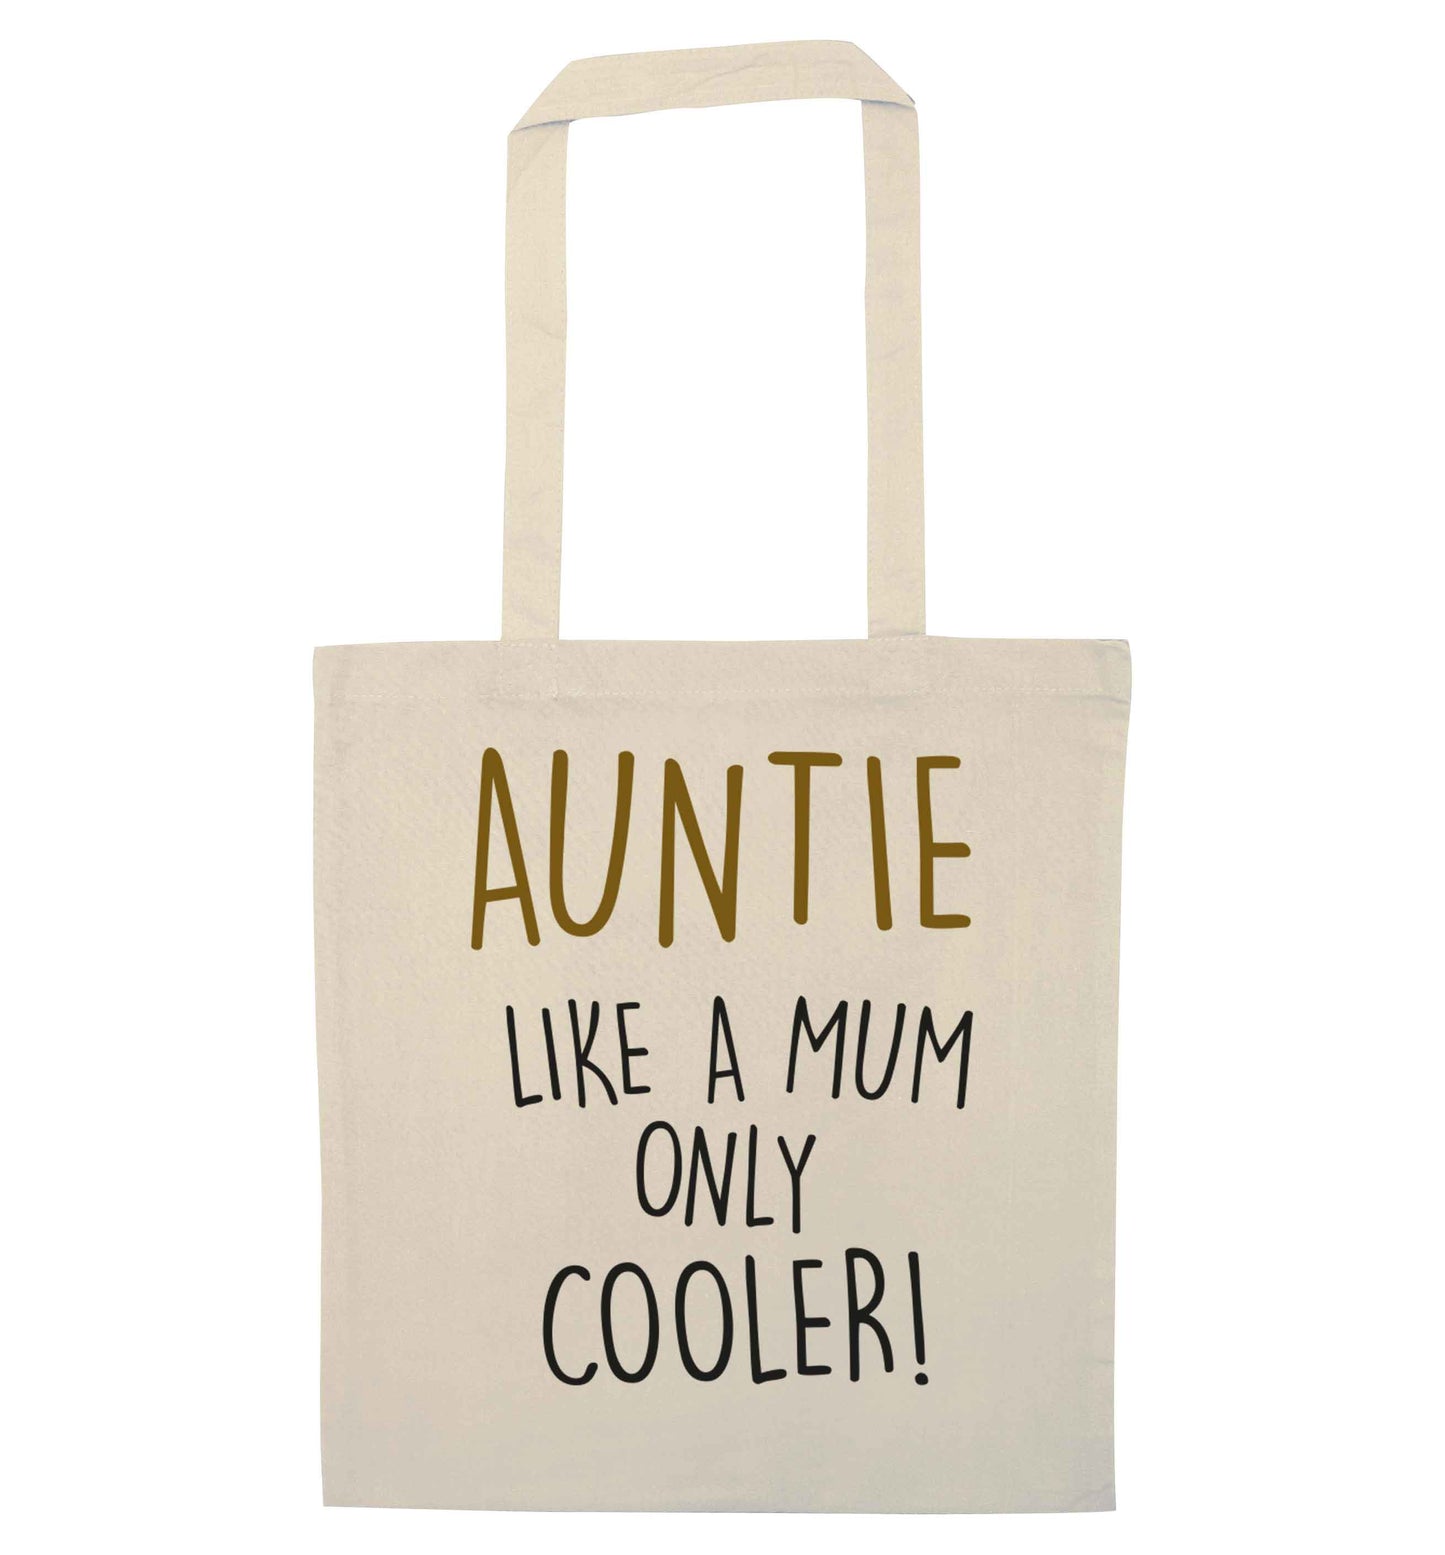 Auntie like a mum only cooler natural tote bag